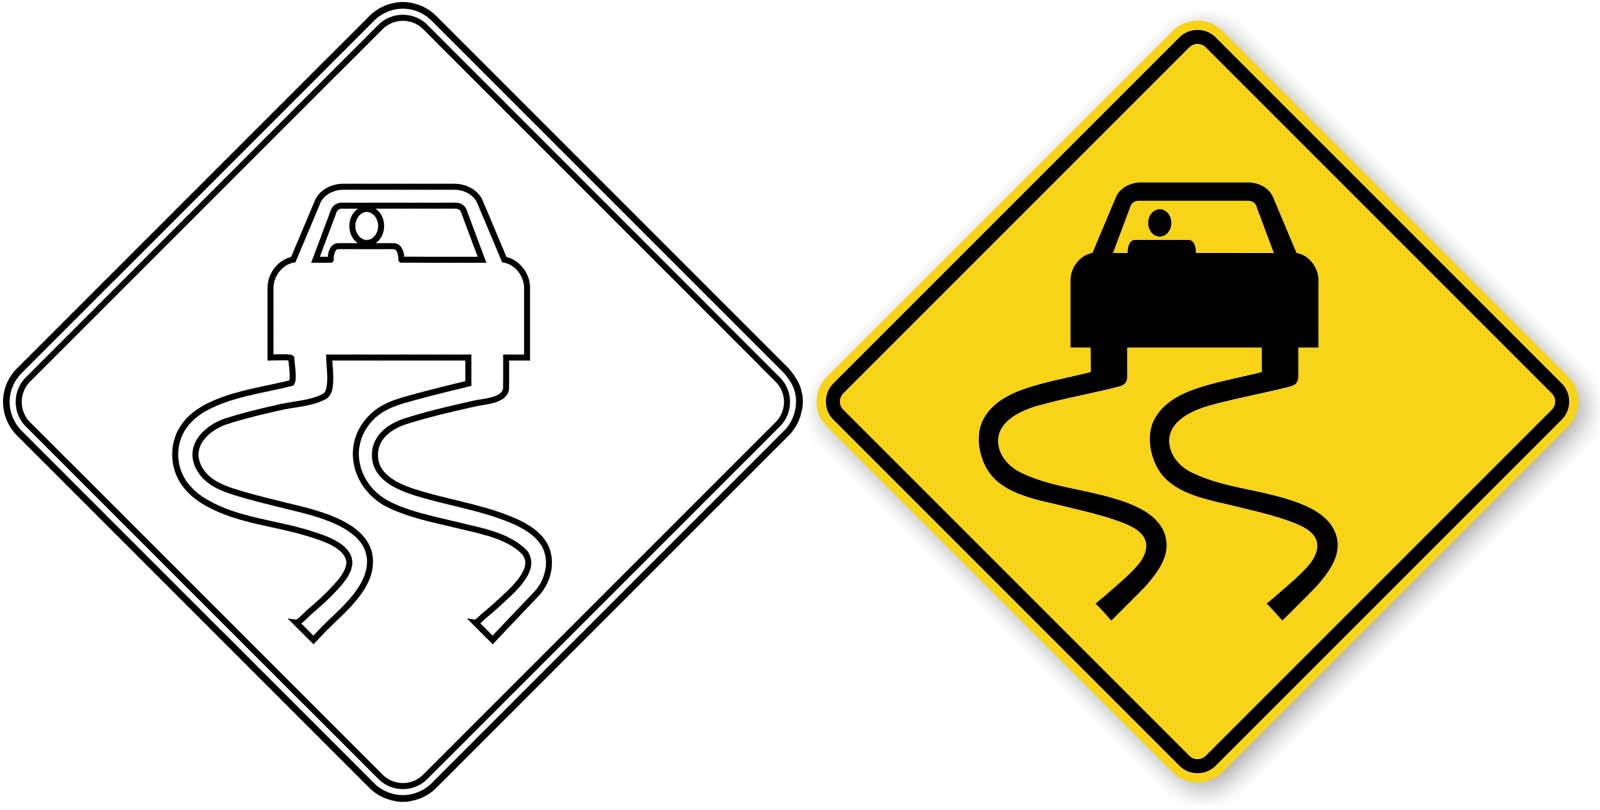 slippery road sign clipart